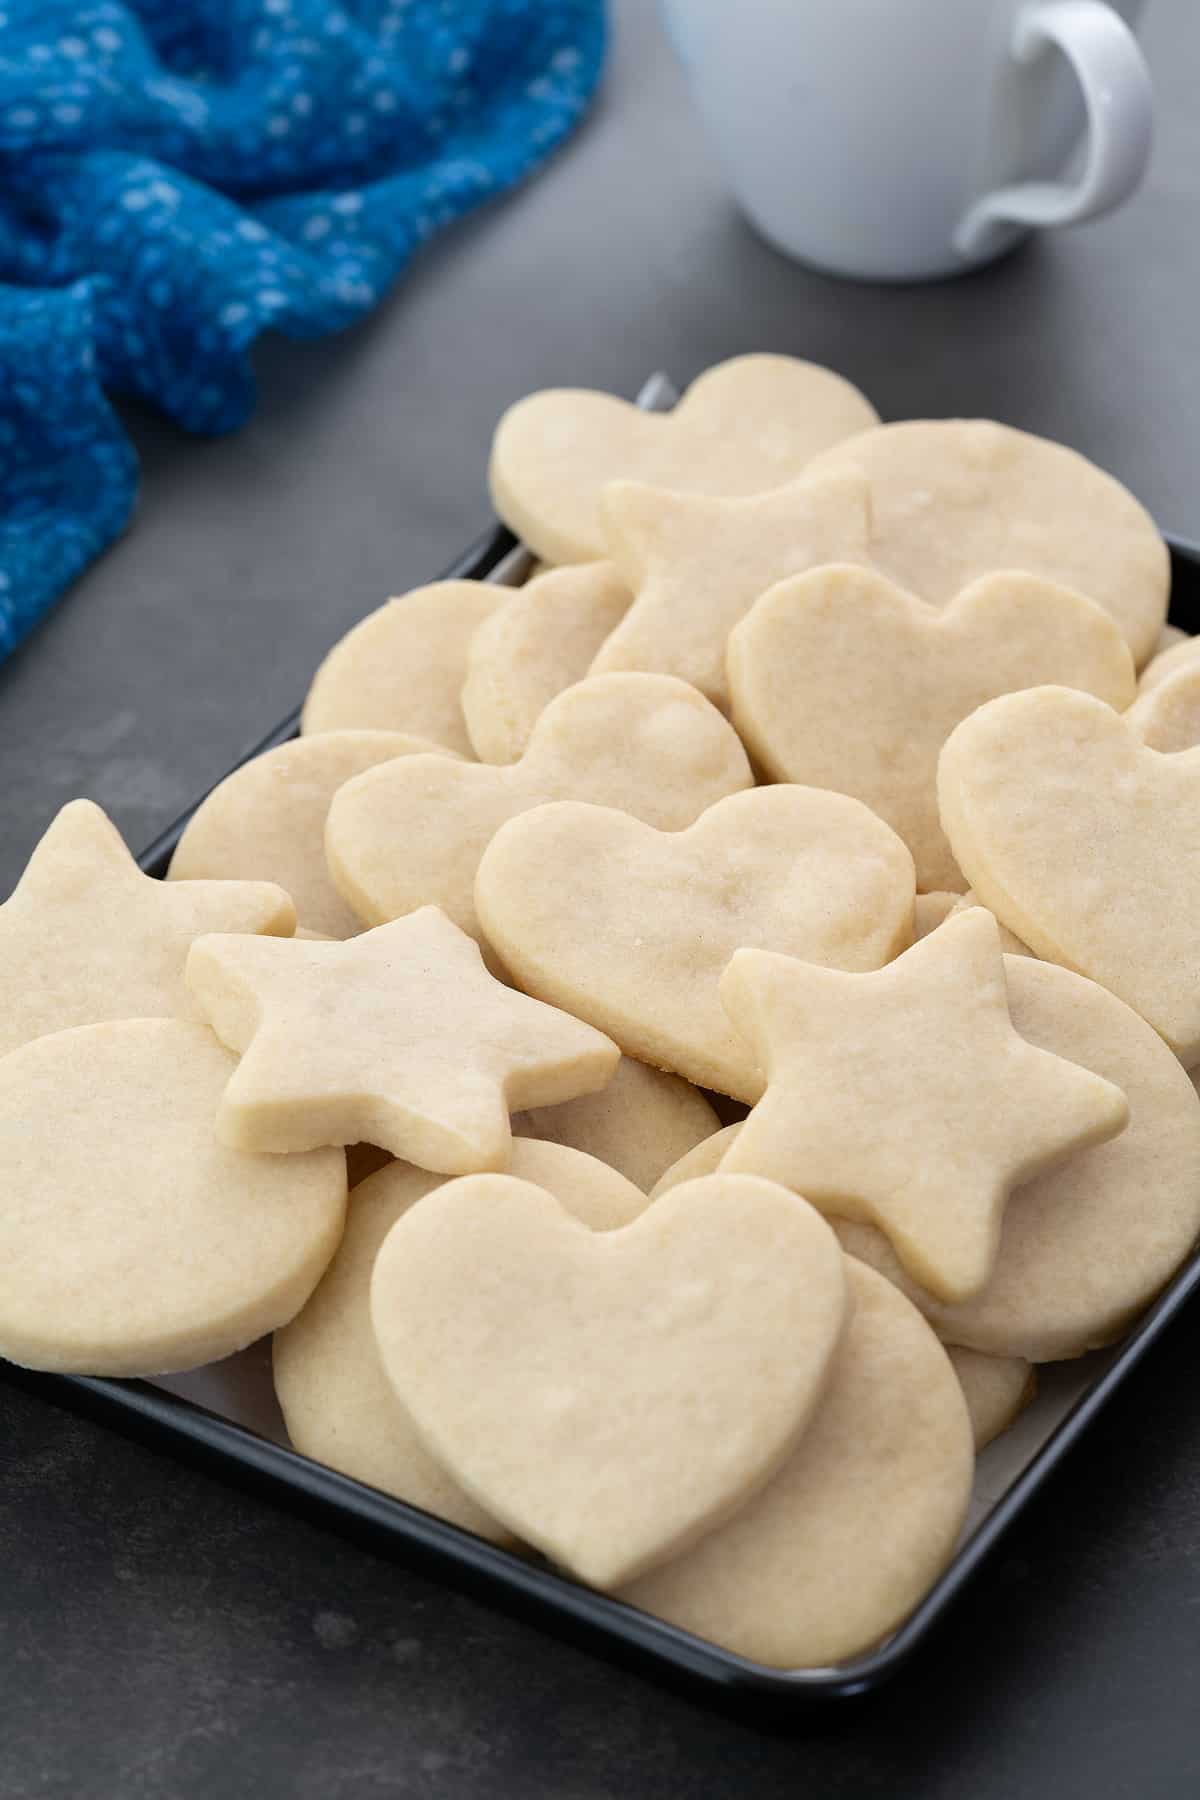 Assorted shortbread cookies in heart, star, and round shapes on a serving tray, accompanied by a coffee cup and a blue towel arranged around it.